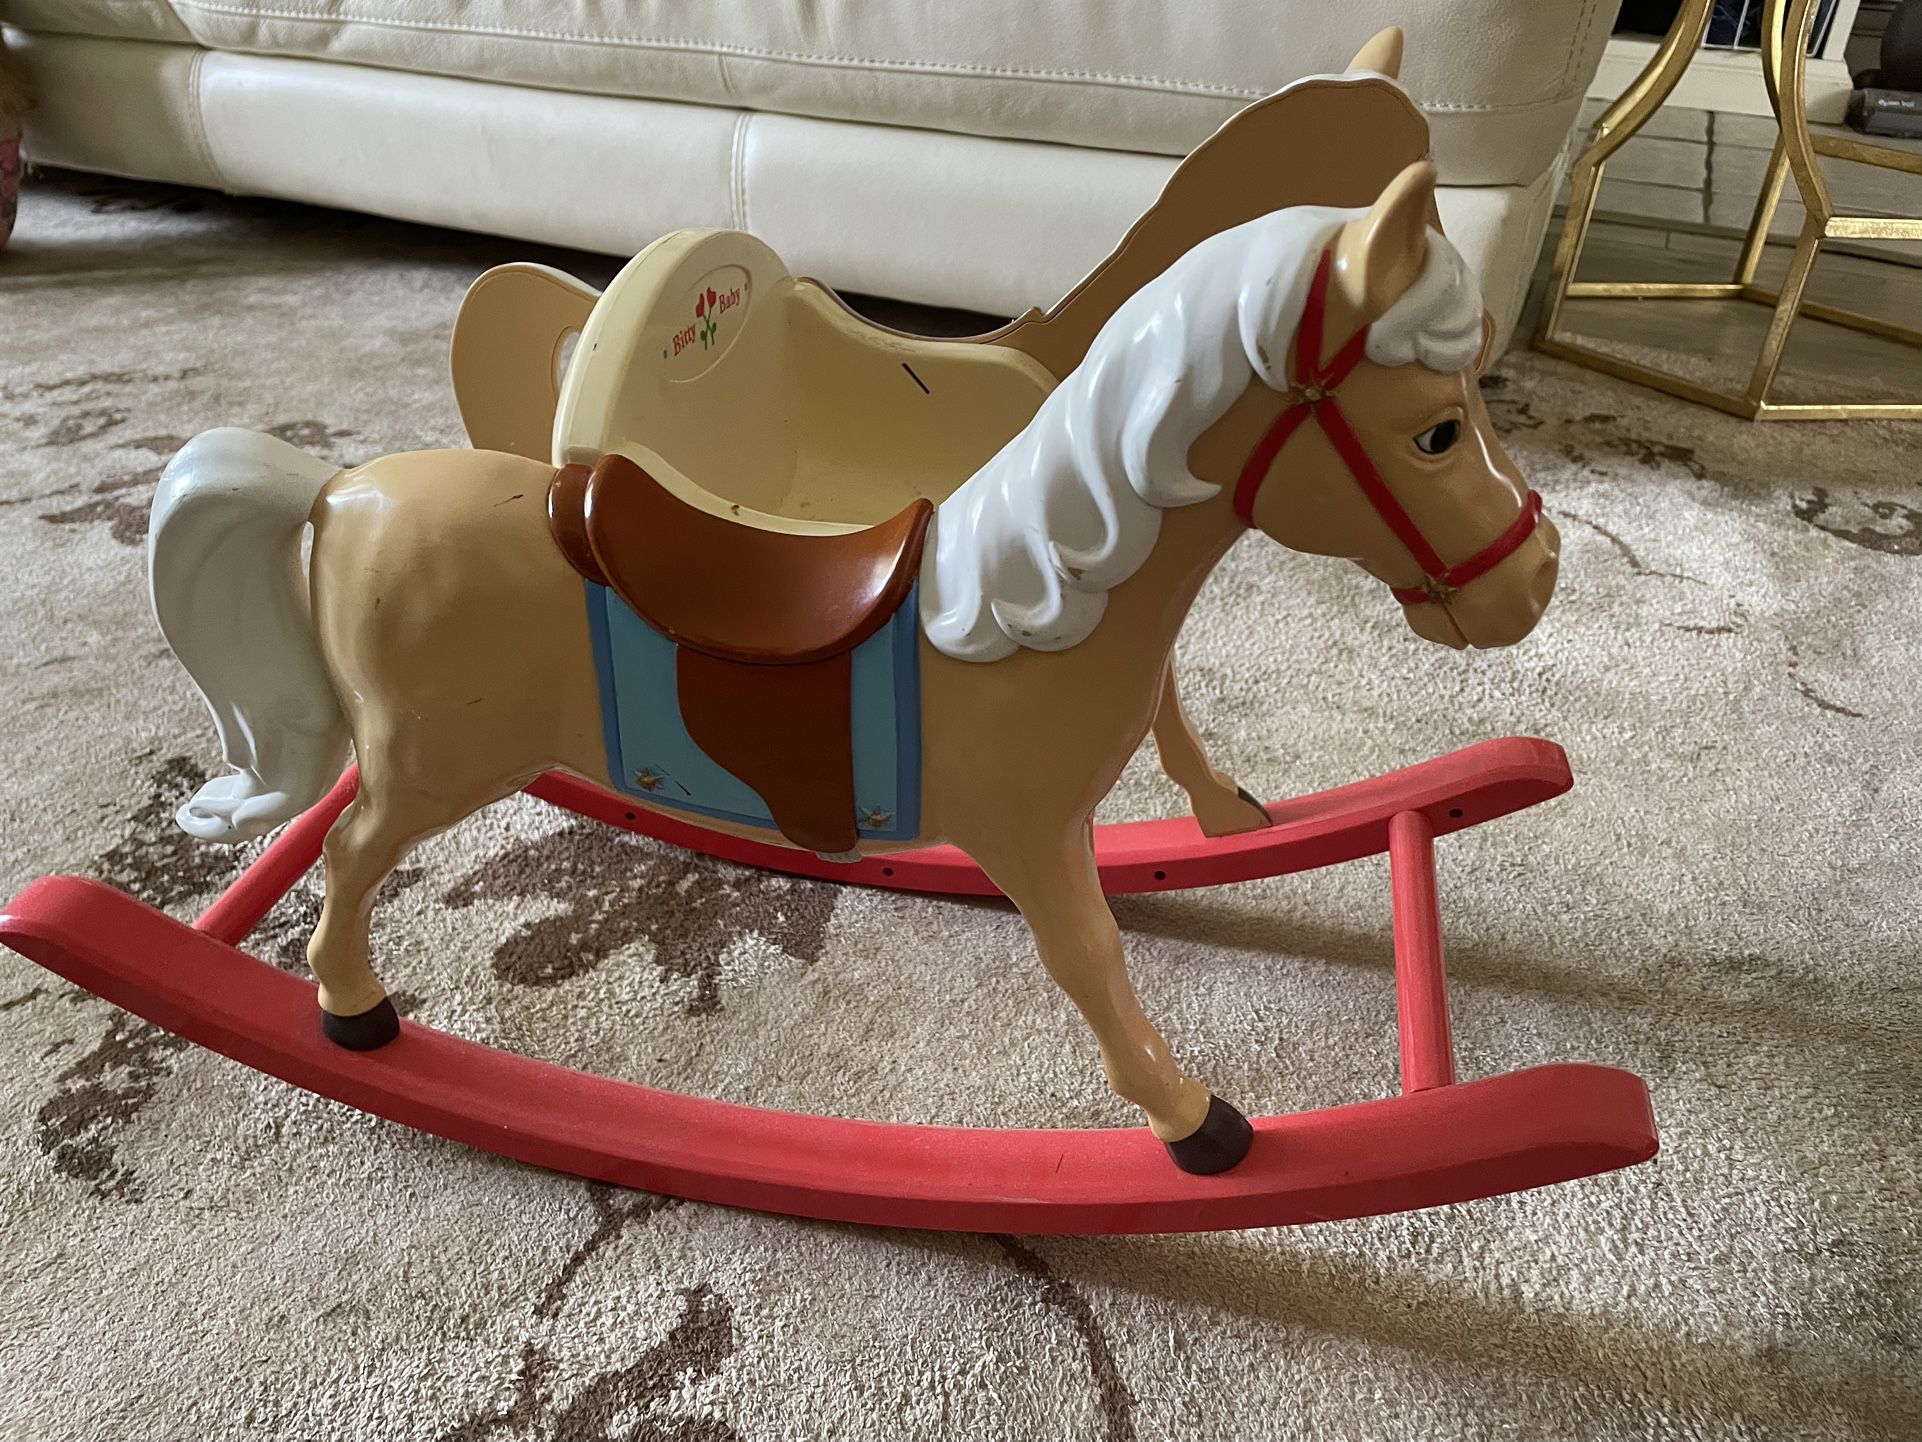 Bitty Baby American Doll Vintage Rocking Horse